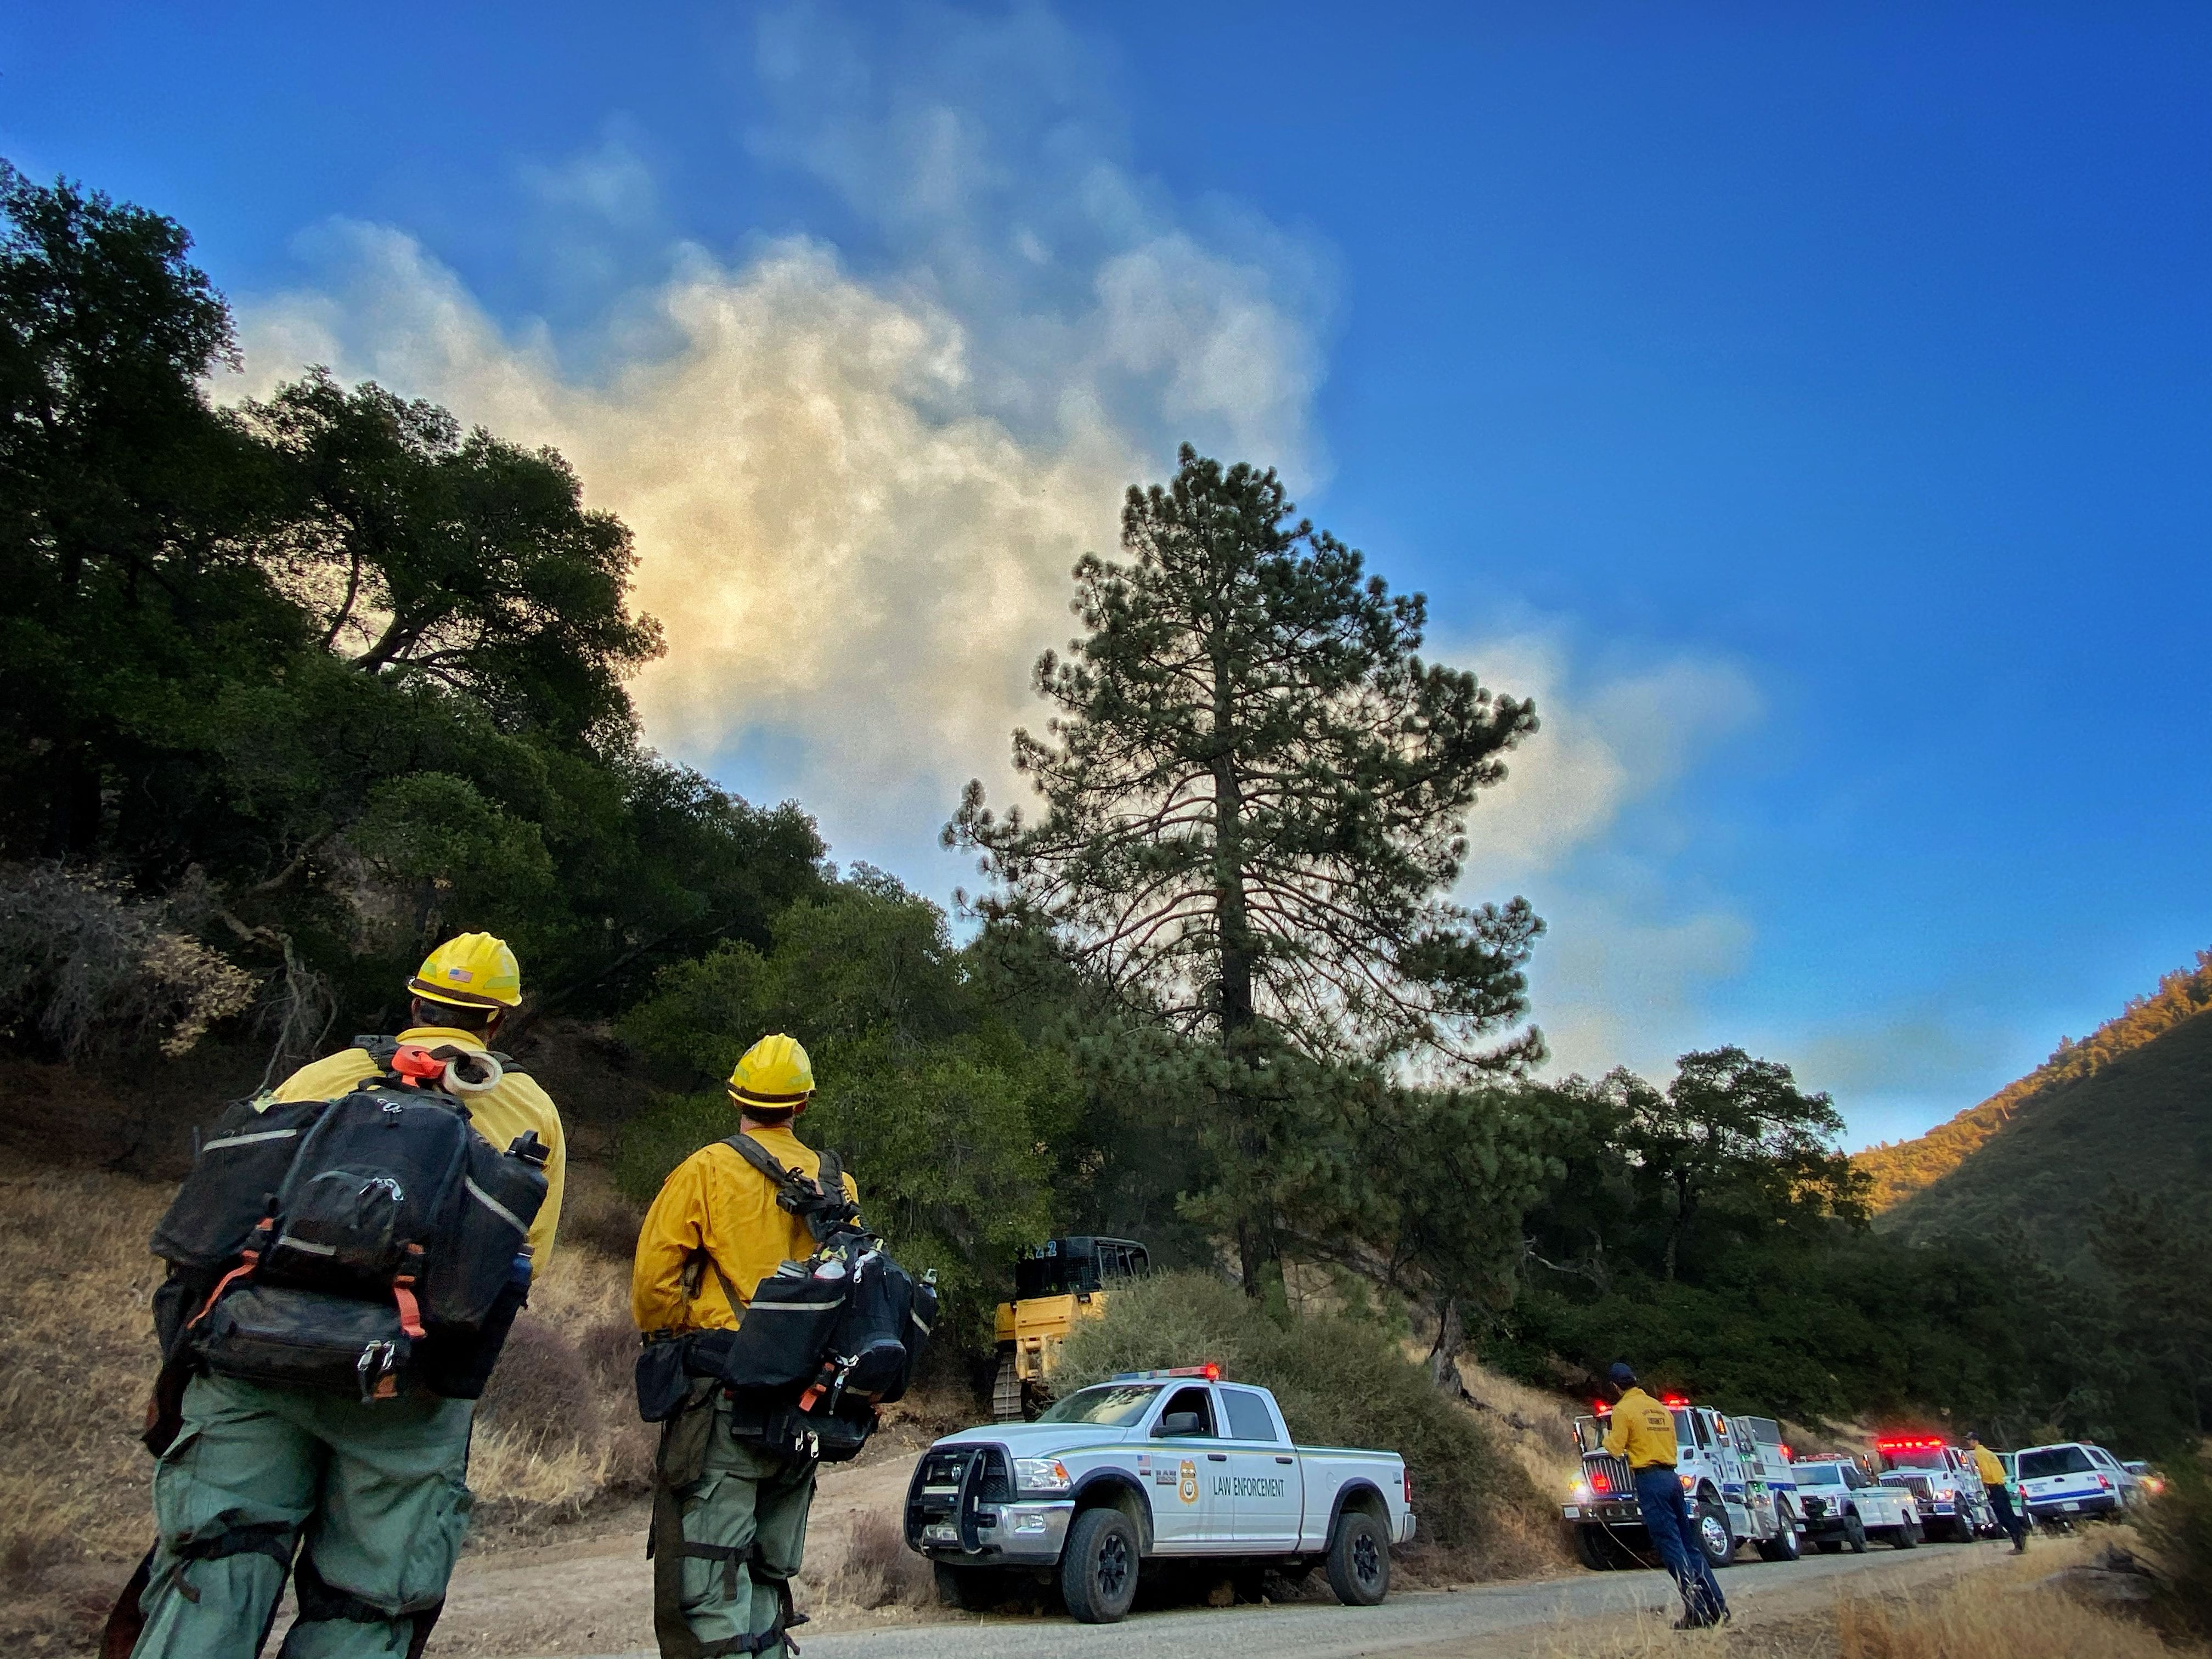 Two Santa Barbara firefighters at a staging area, with firetrucks parked against a hill and smoke in the blue sky beyond the hill.